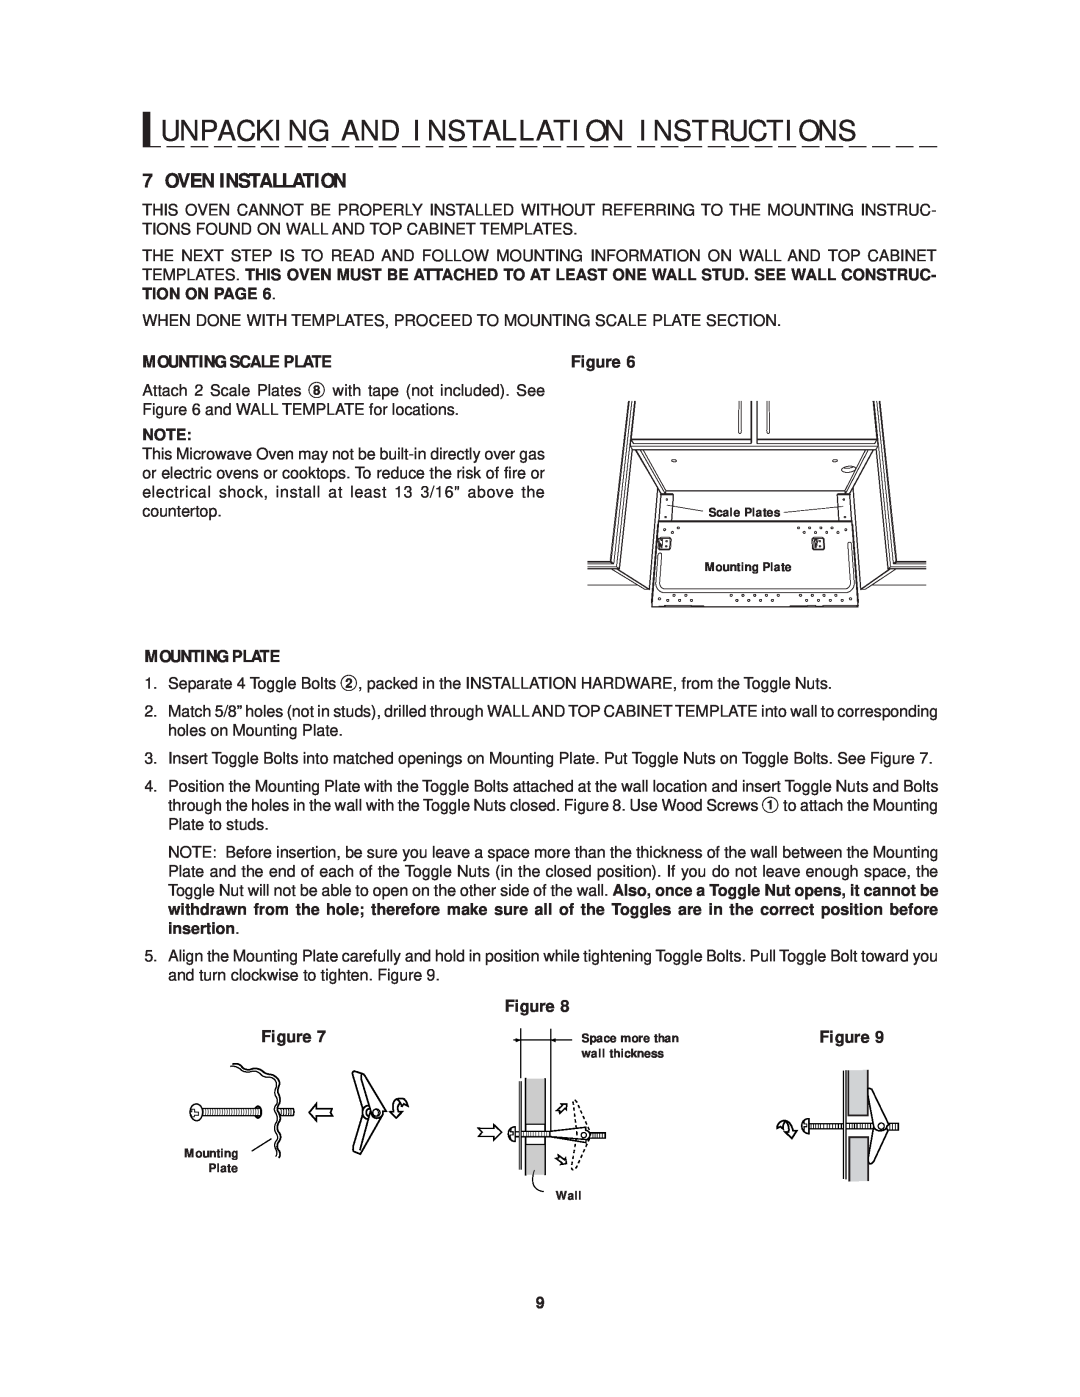 Sharp R-1214 operation manual Oven Installation, Mounting Scale Plate, Mounting Plate 